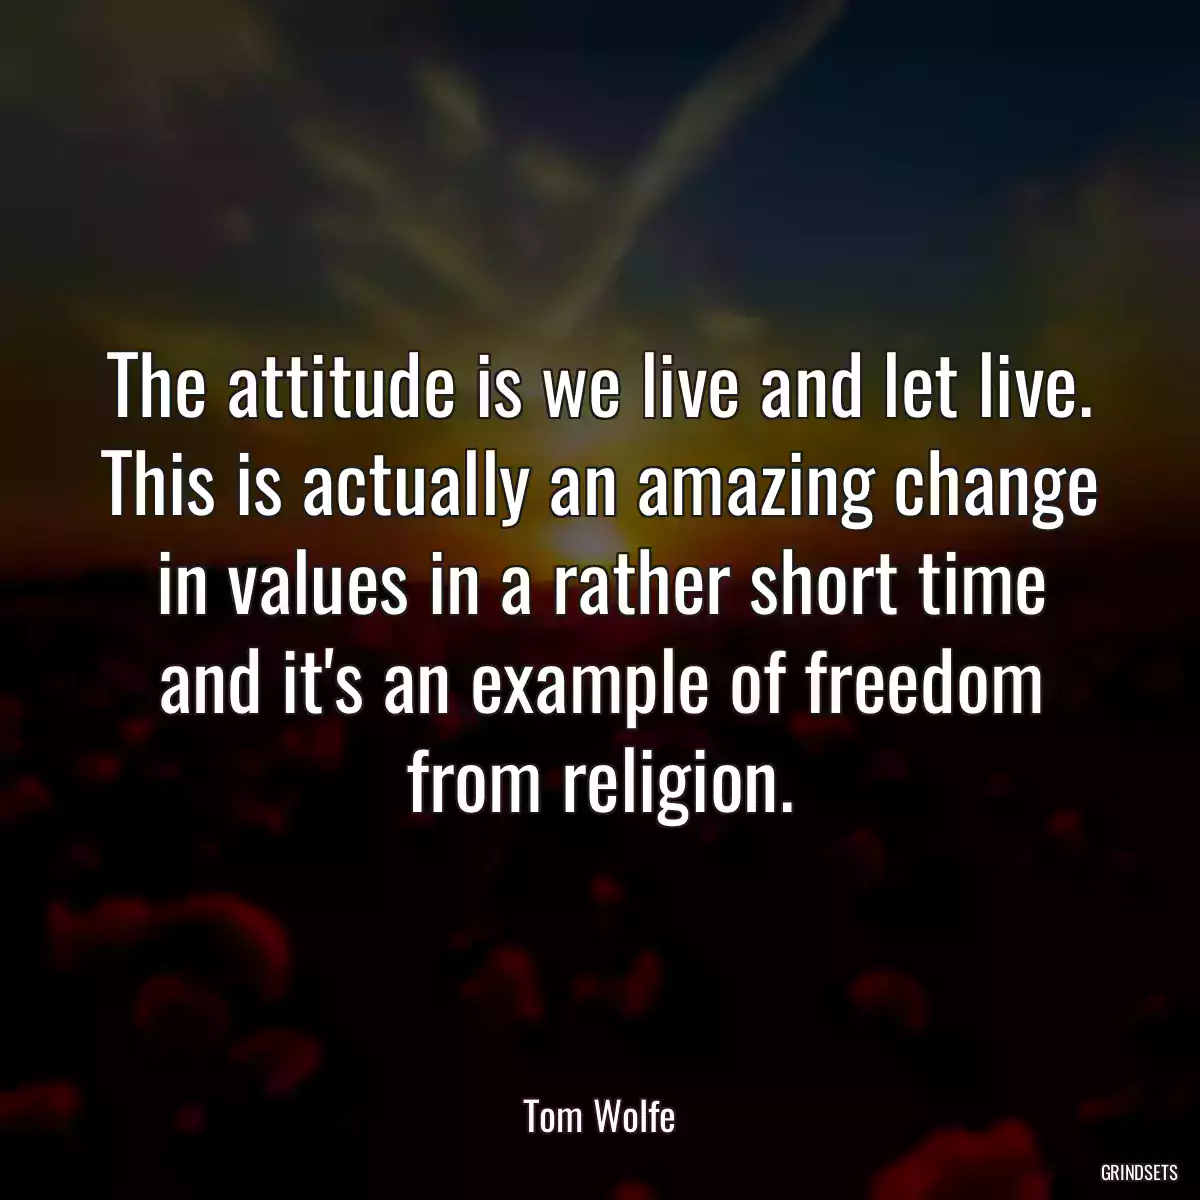 The attitude is we live and let live. This is actually an amazing change in values in a rather short time and it\'s an example of freedom from religion.